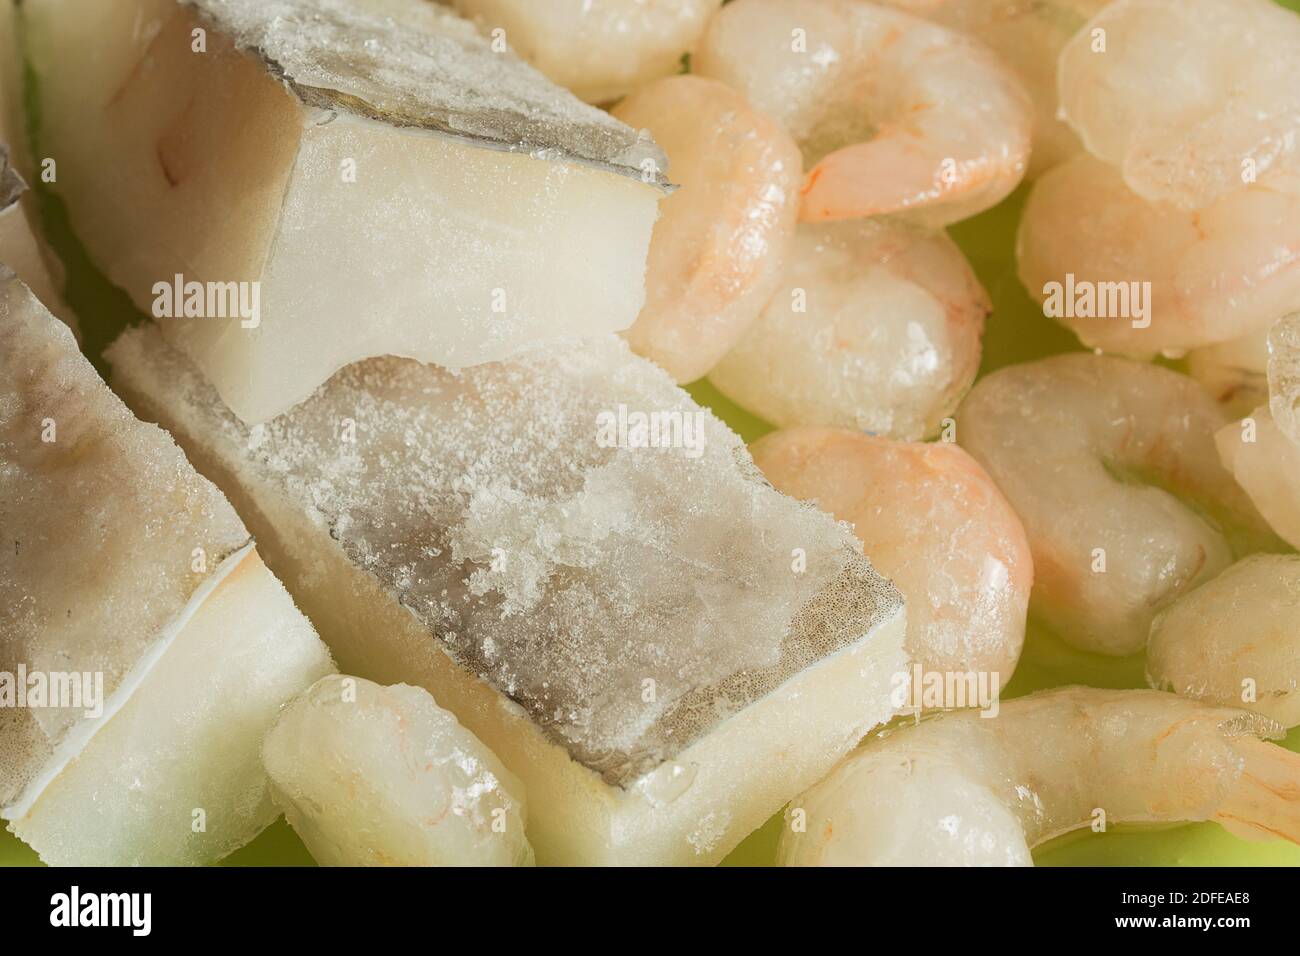 Close-up of some delicious raw cod fillets with ice glaze accompanied by some thawed prawns. Fish and seafood meat. Stock Photo